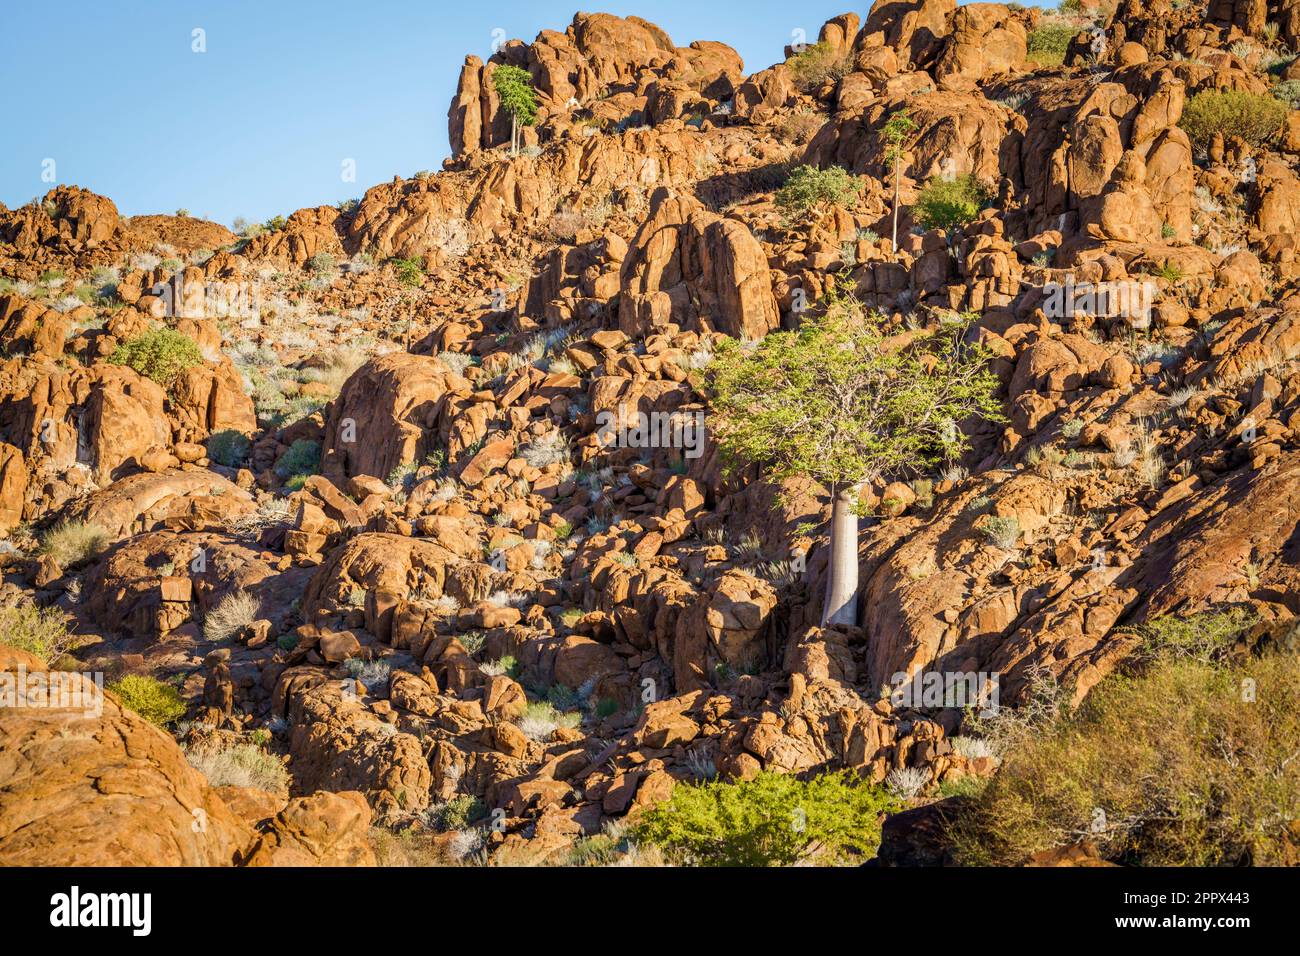 Moringa tree stands between rocks on the foot of a hill in Damaraland, Namibia, Africa Stock Photo